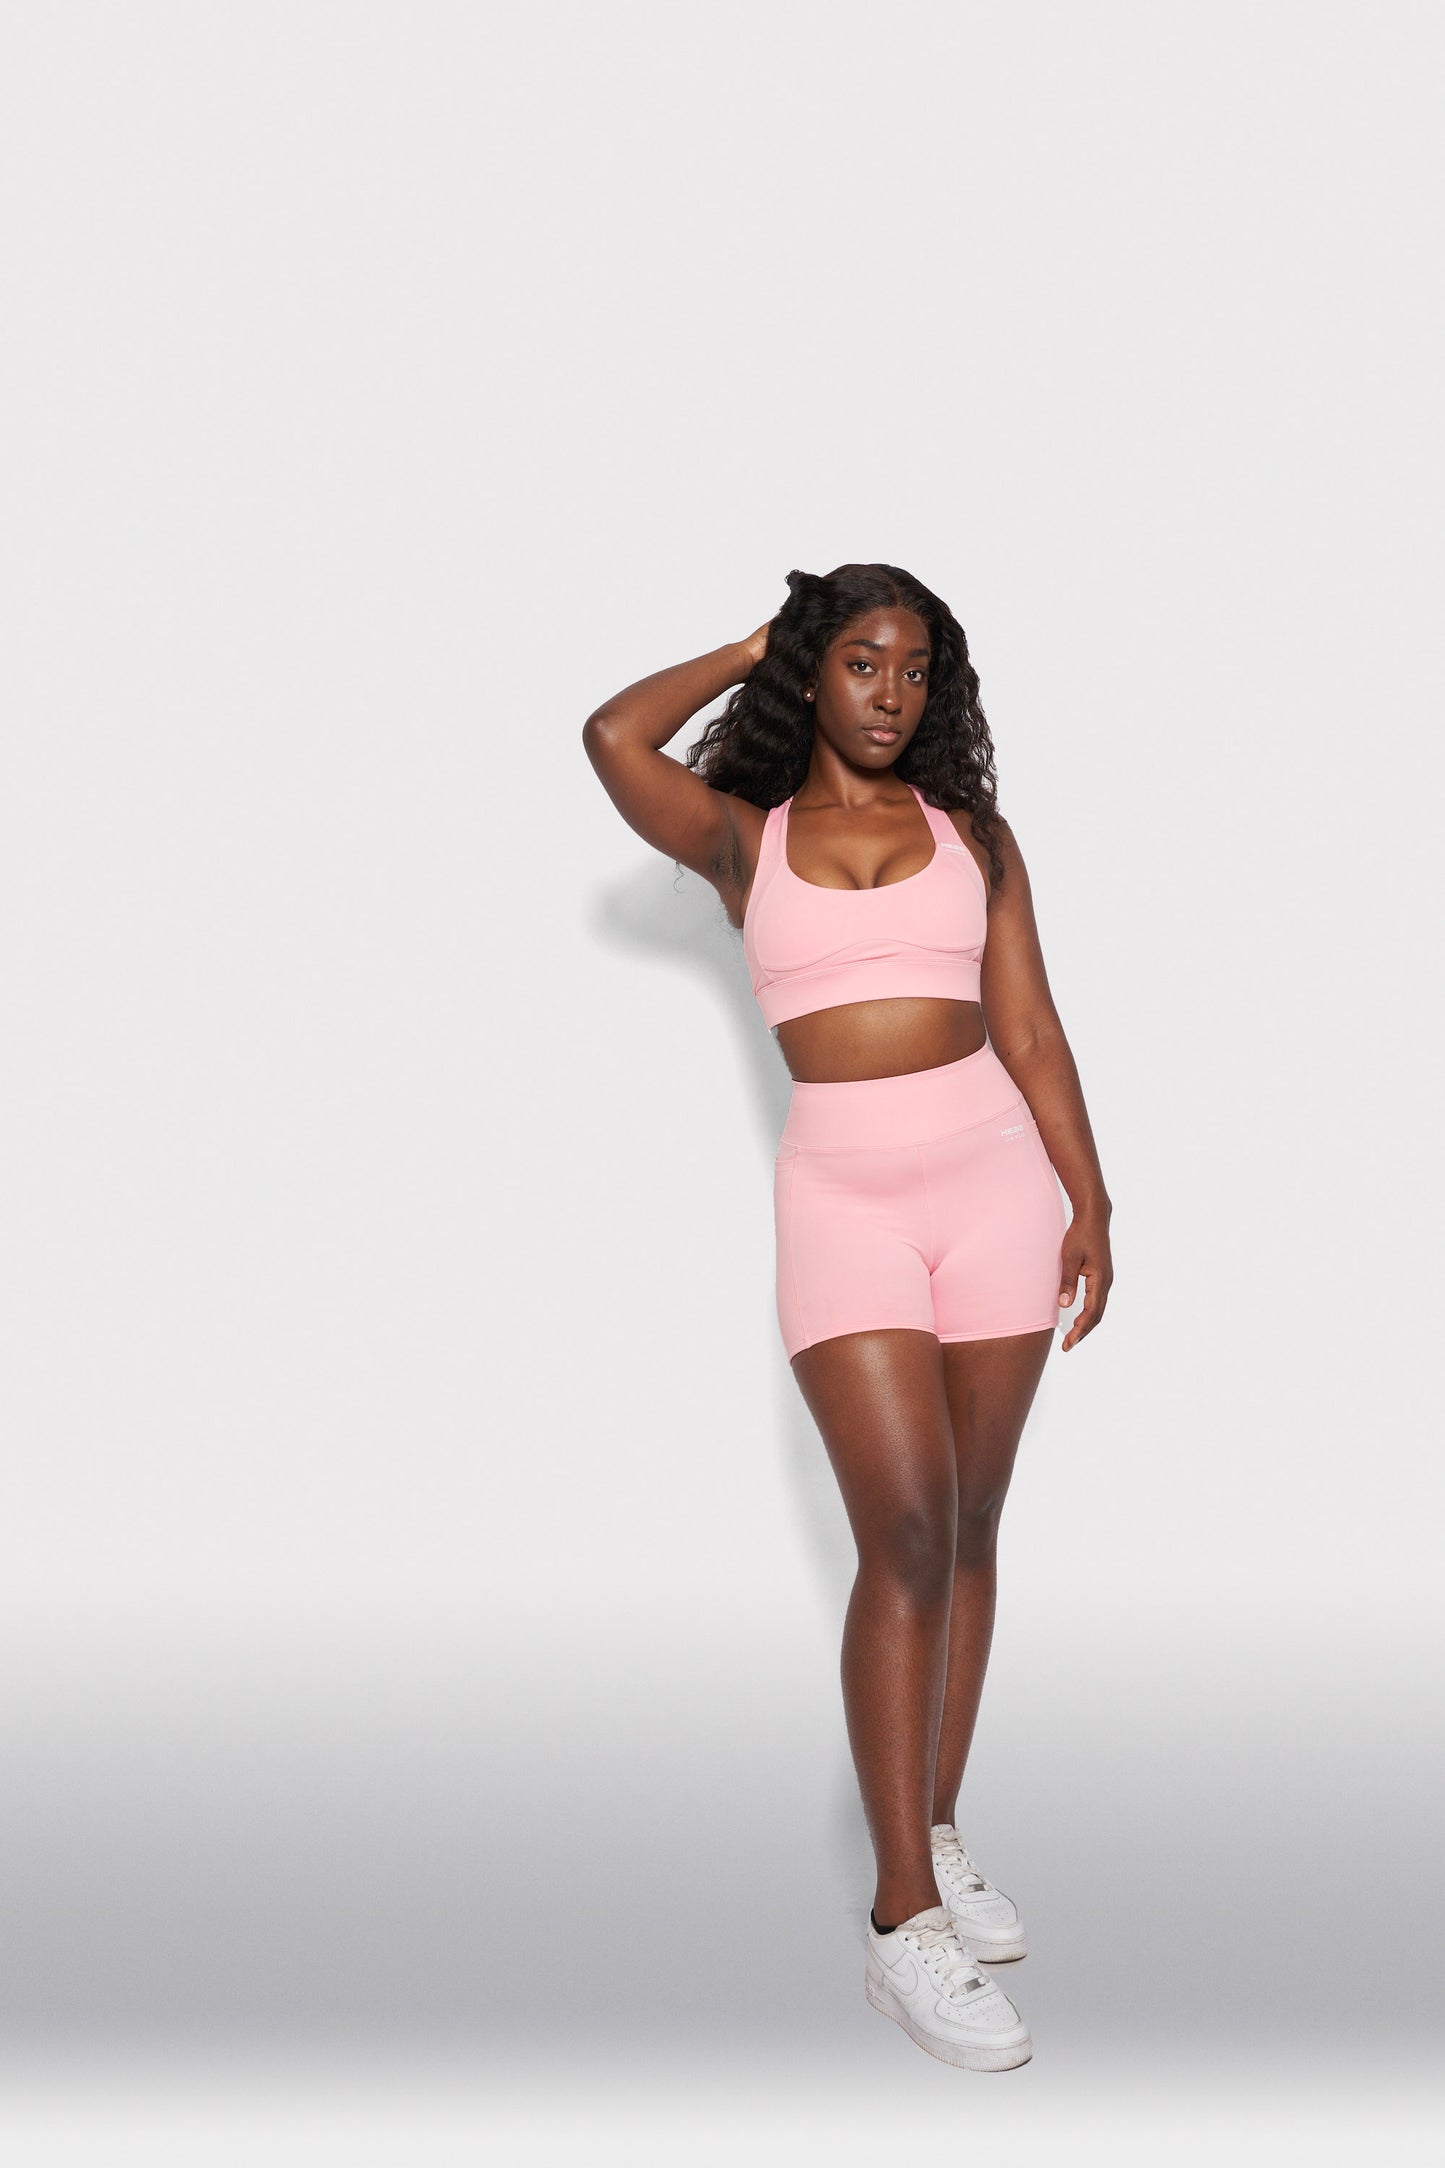 girl in pink hebe shorts and bra top gymwear set